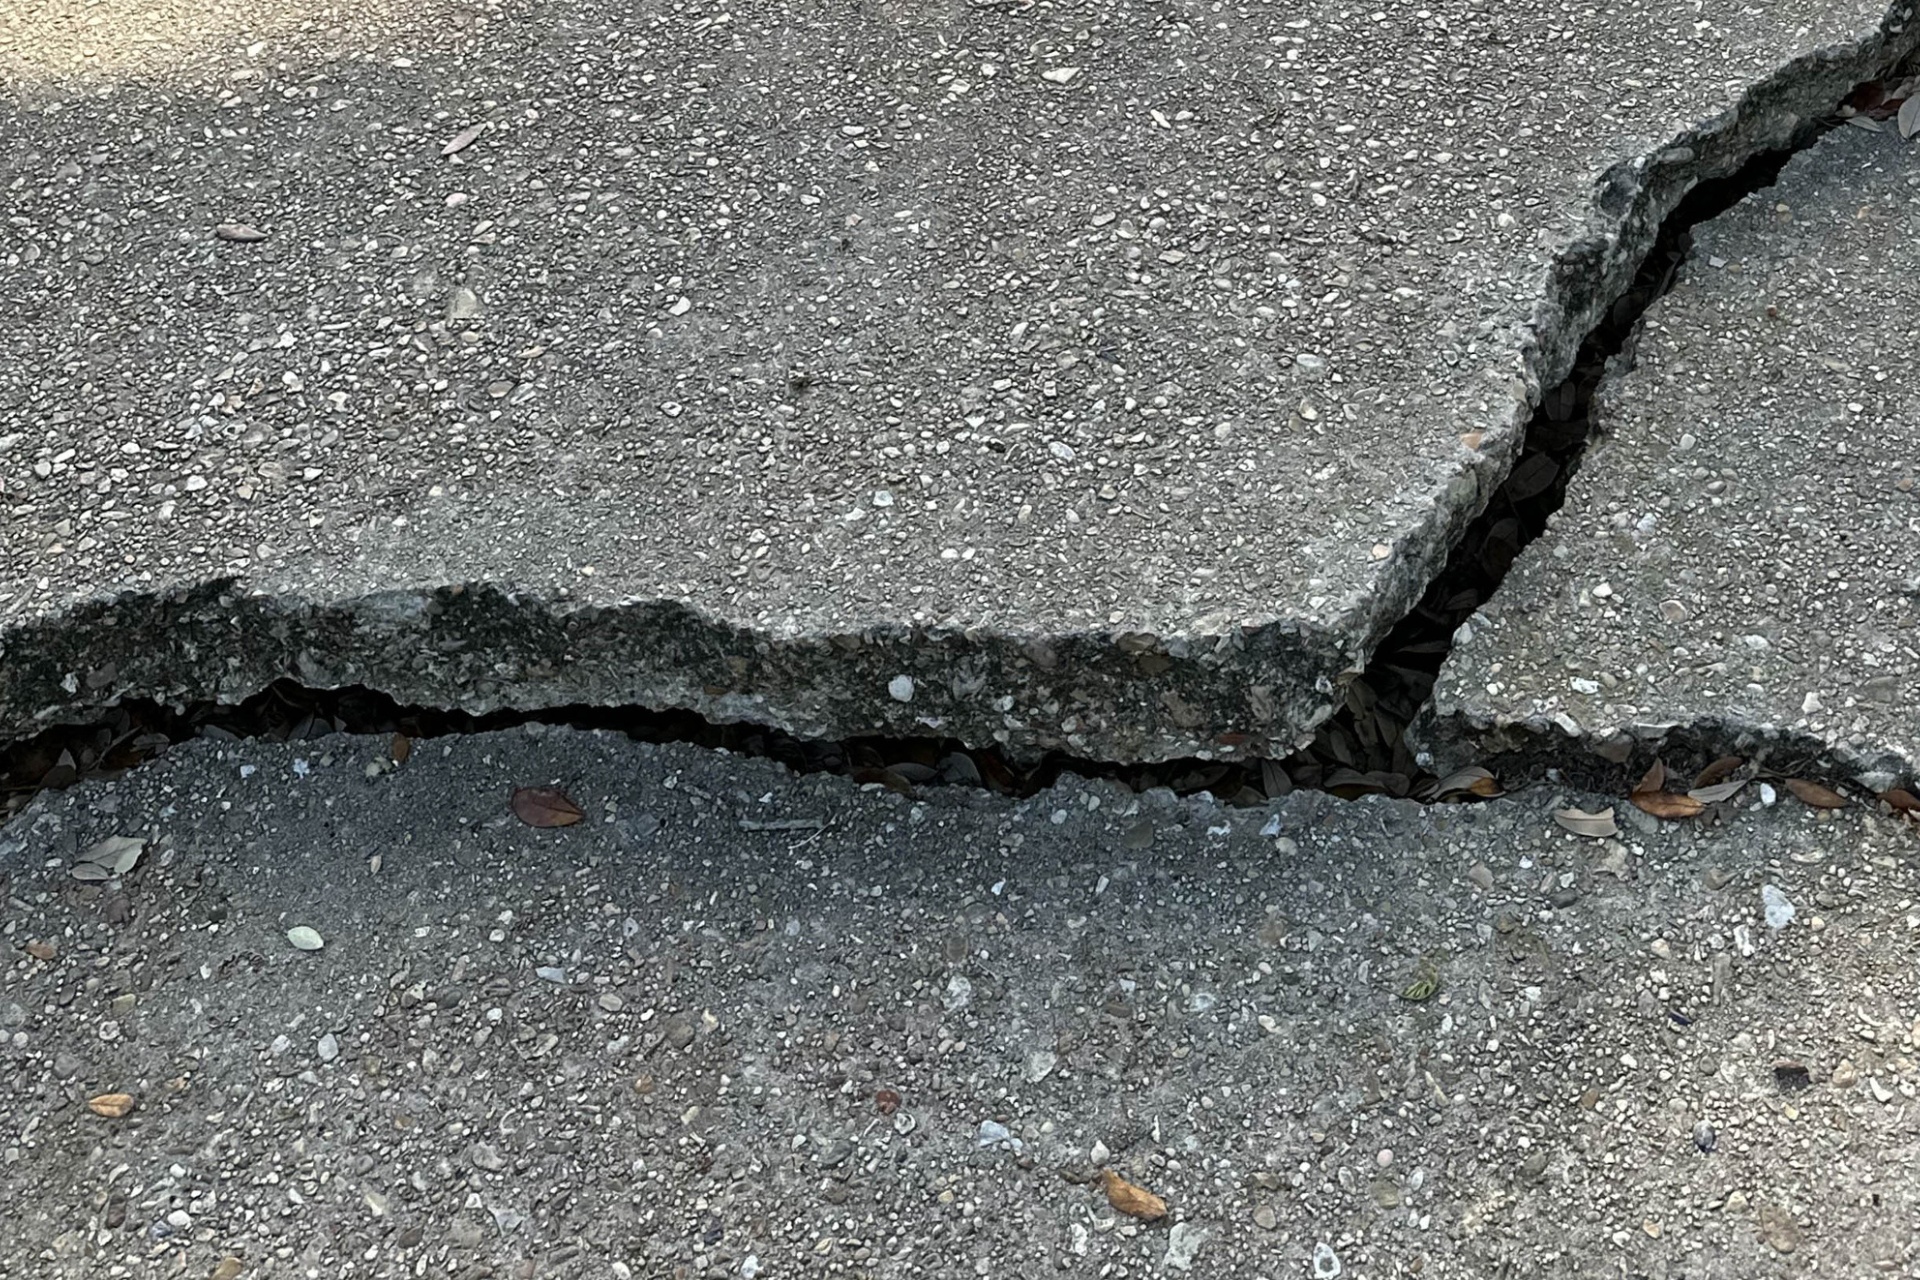 A concrete driveway with multiple cracks and severe heaving.